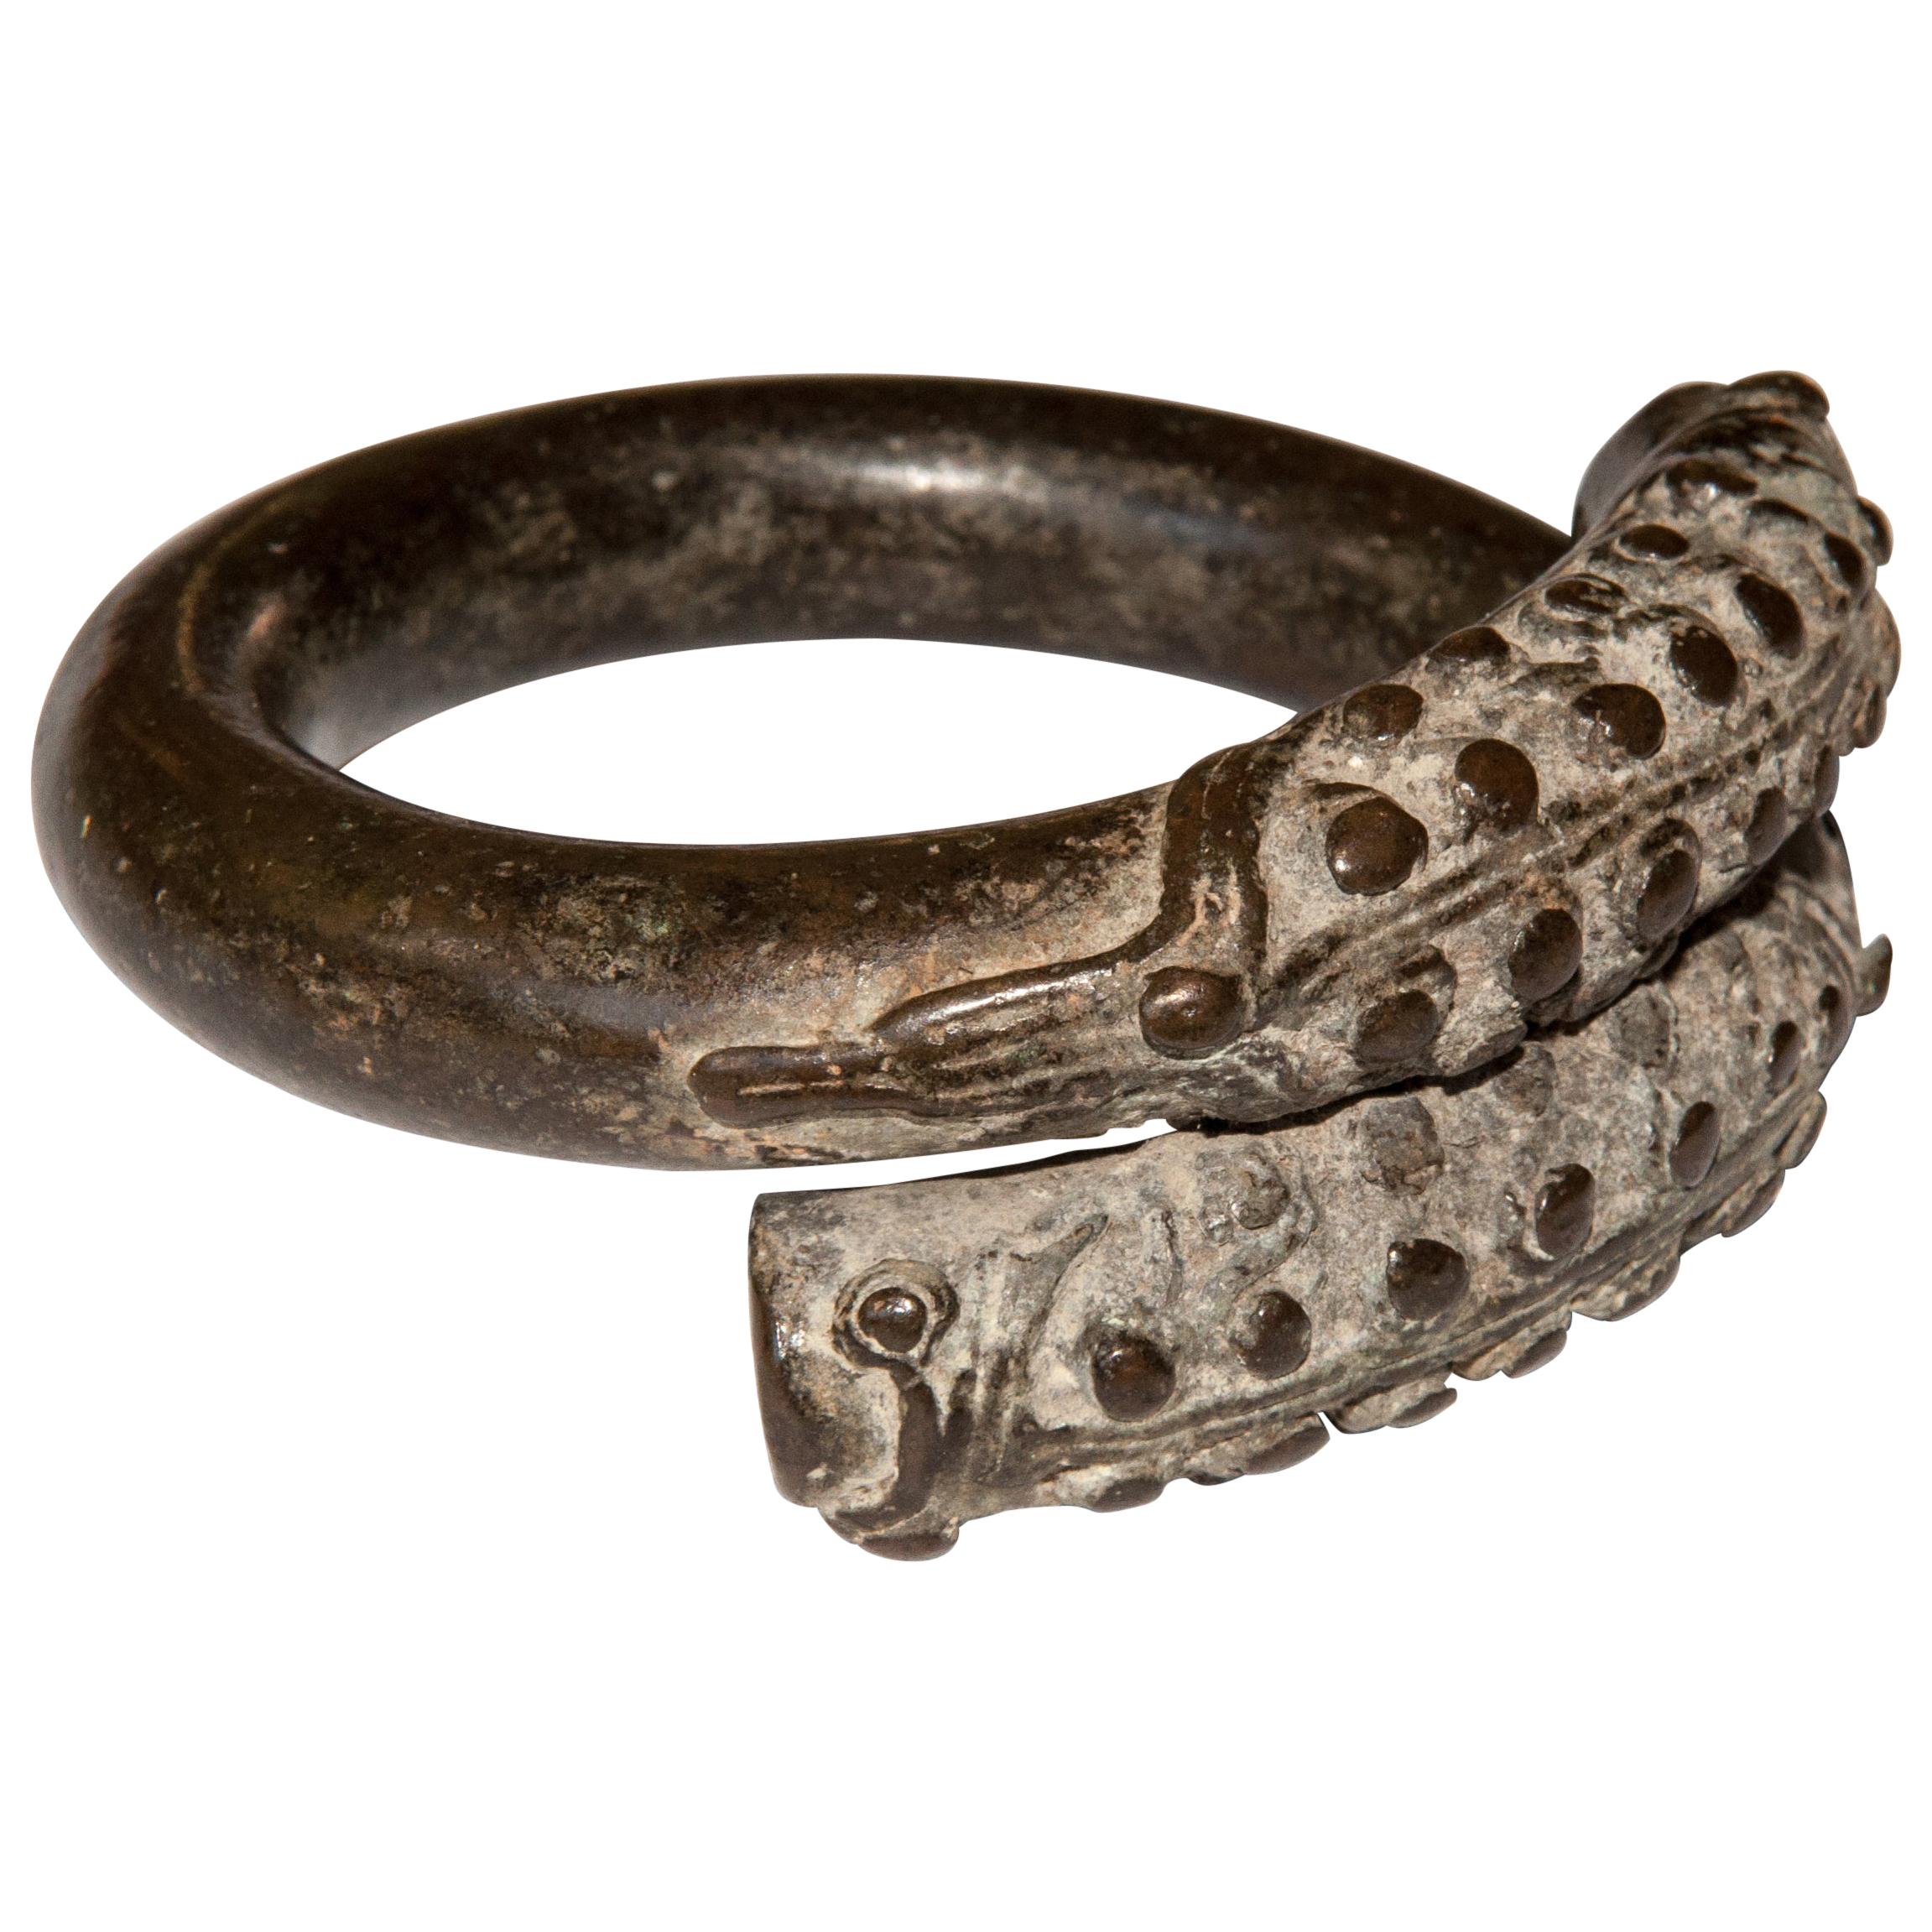 Antique Bronze Bracelet from Laos with a Naga or Serpent Motif, 18th Century